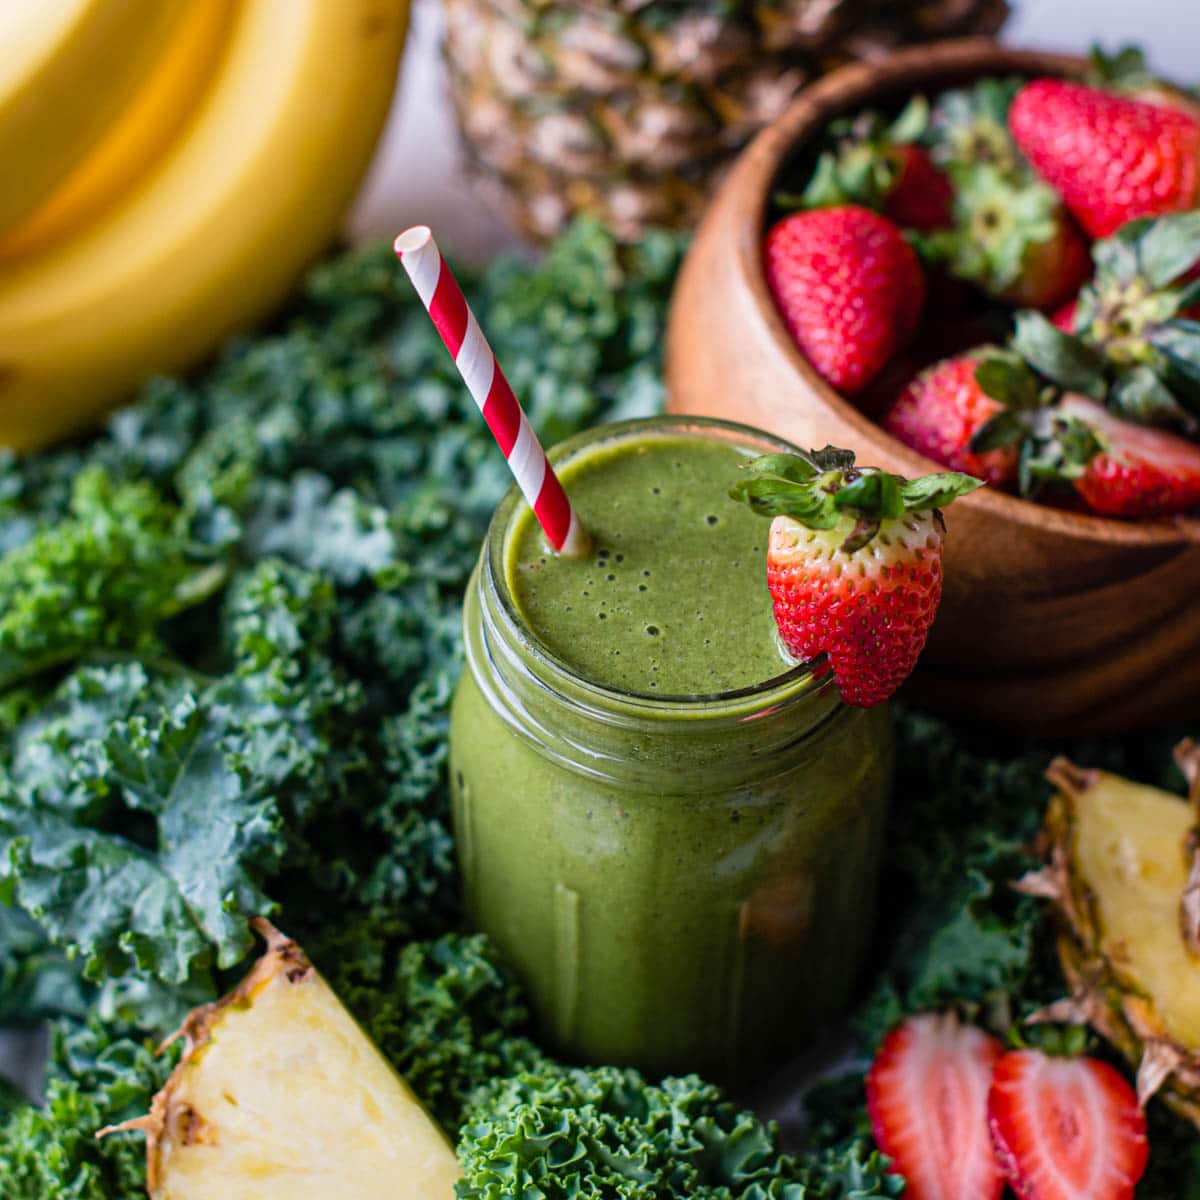 kale banana smoothie surrounded by fresh ingredients